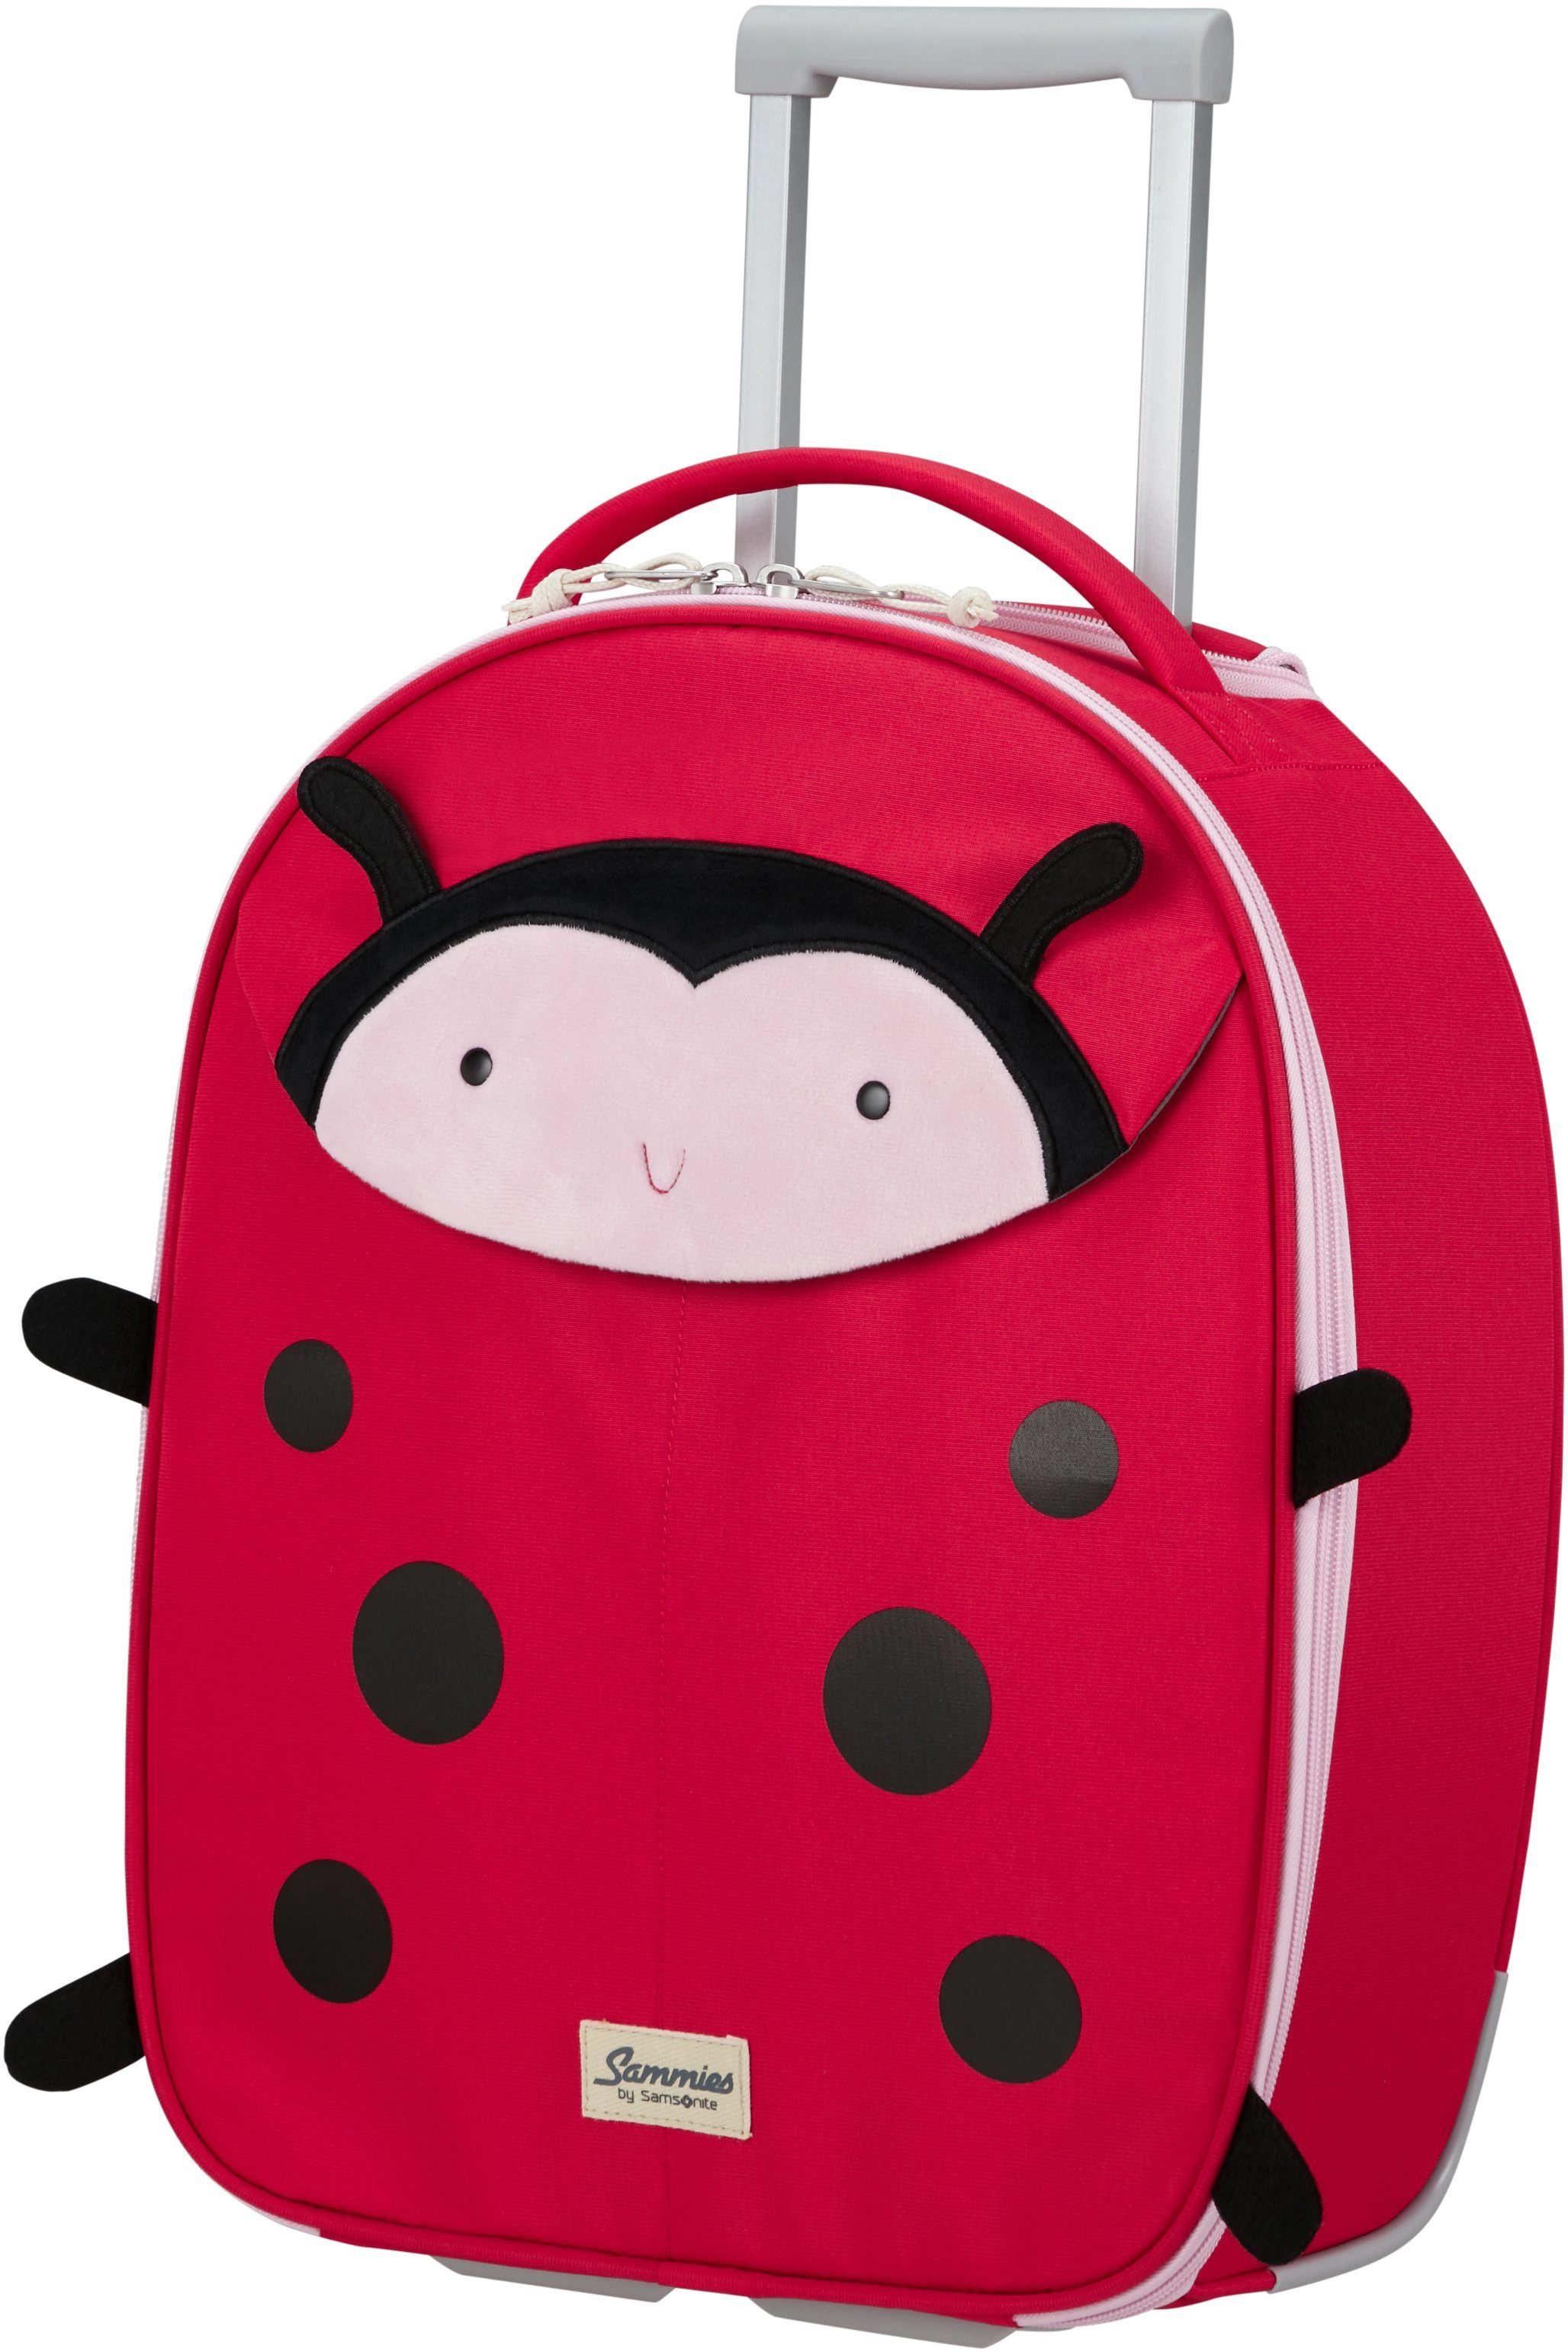 Happy 2 Sammies Lally, Material ECO, aus Ladybug recyceltem Samsonite Rollen, Kinderkoffer